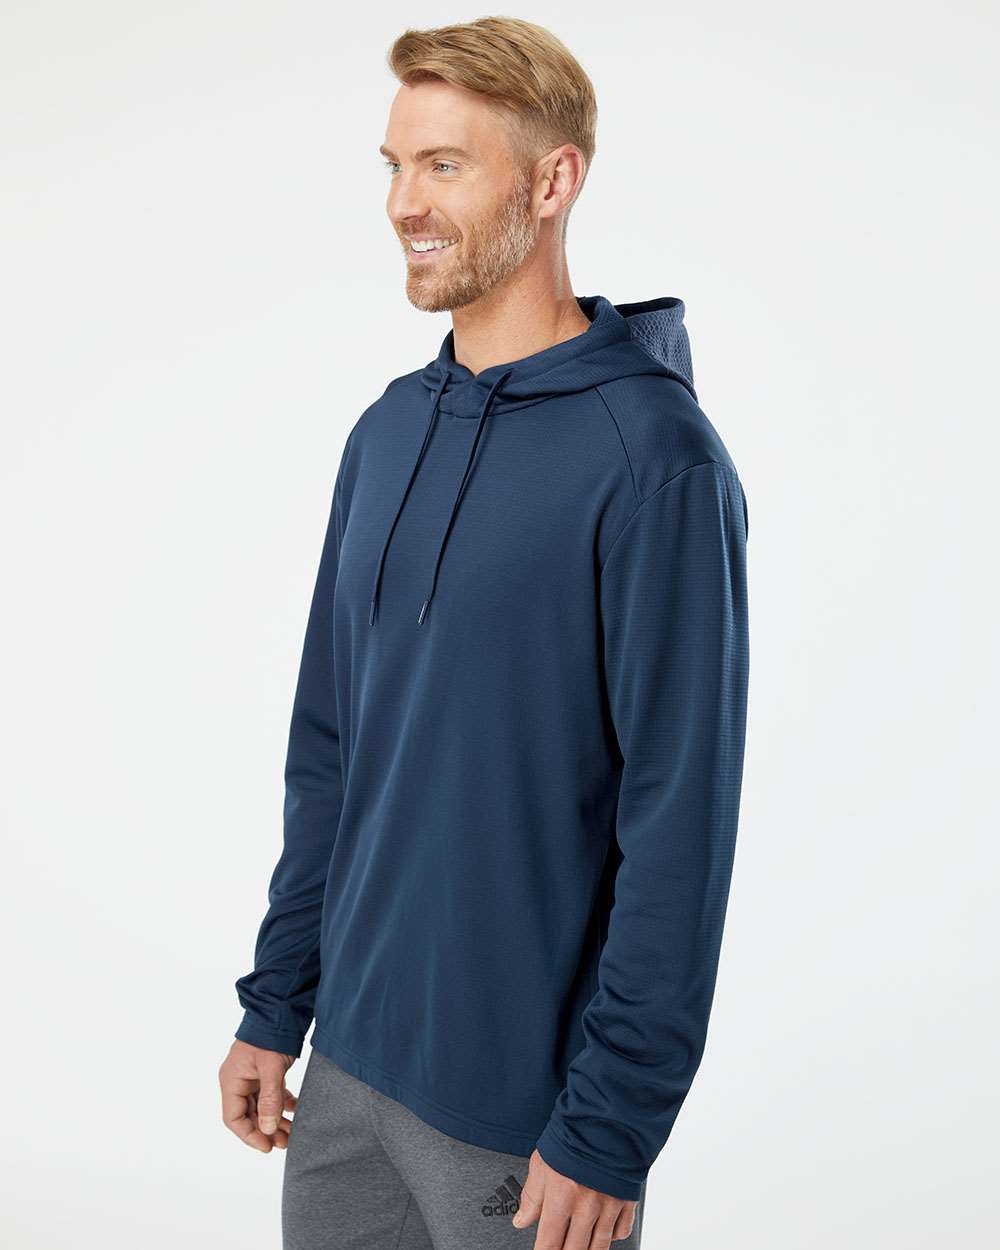 Adidas A530 Textured Mixed Media Hooded Sweatshirt #colormdl_Collegiate Navy